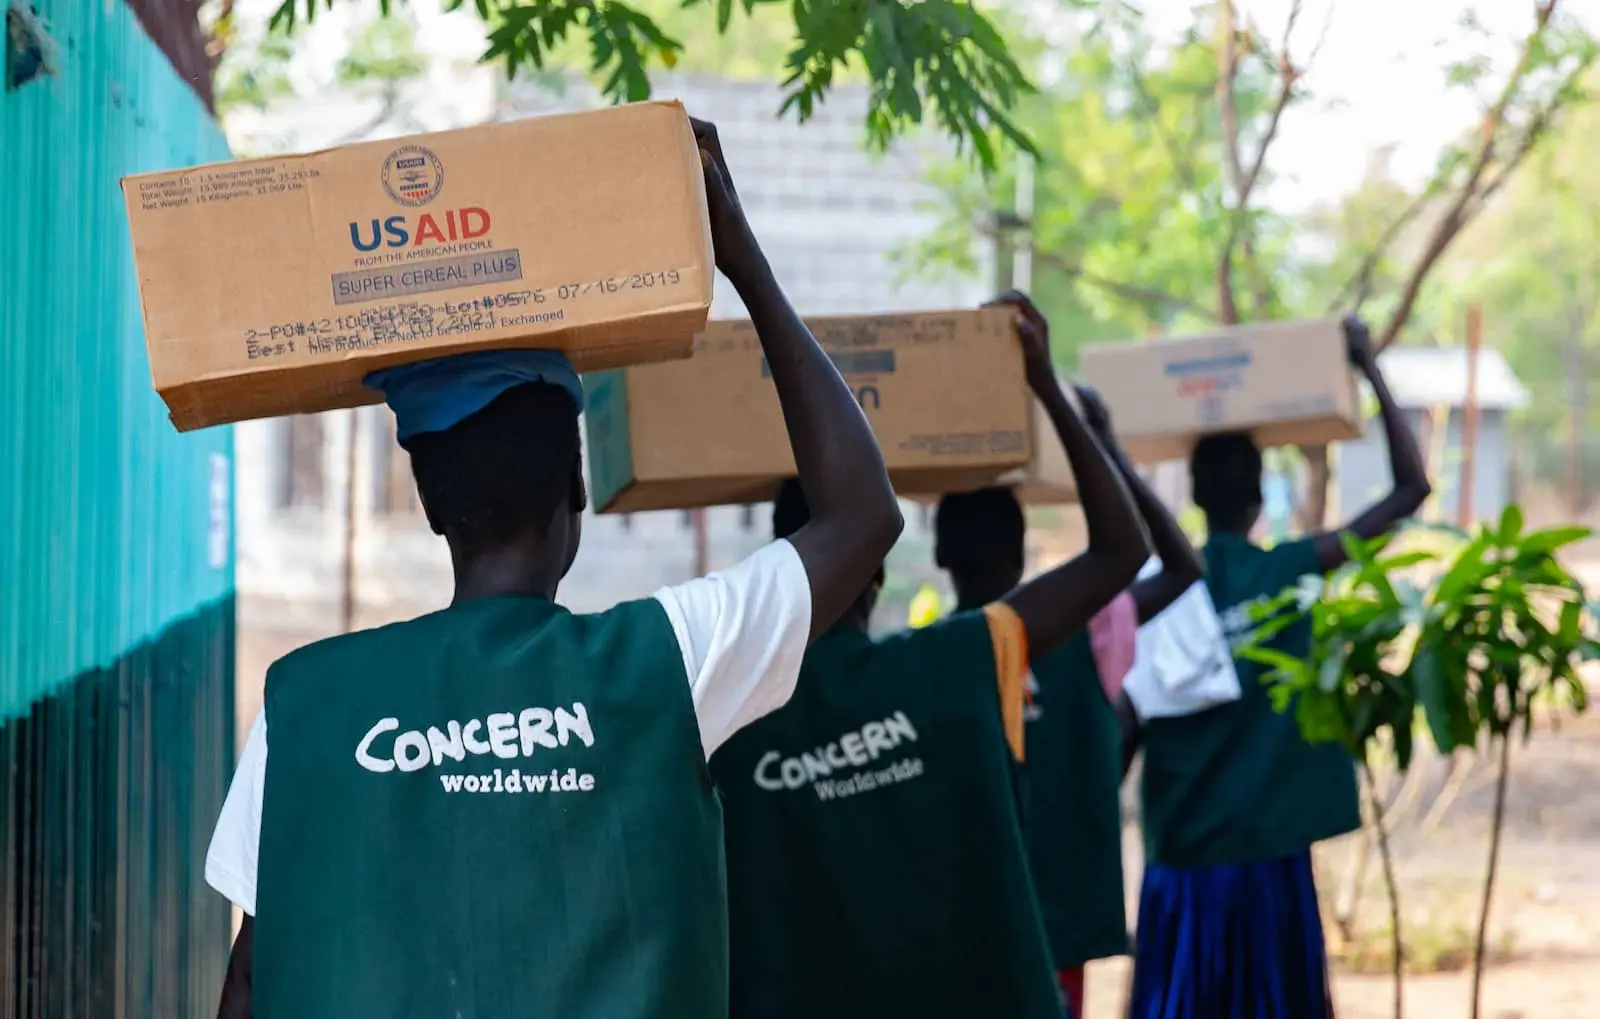 Aid kits funded by USAID are distributed in Ethiopia. (Photo: Concern Worldwide)